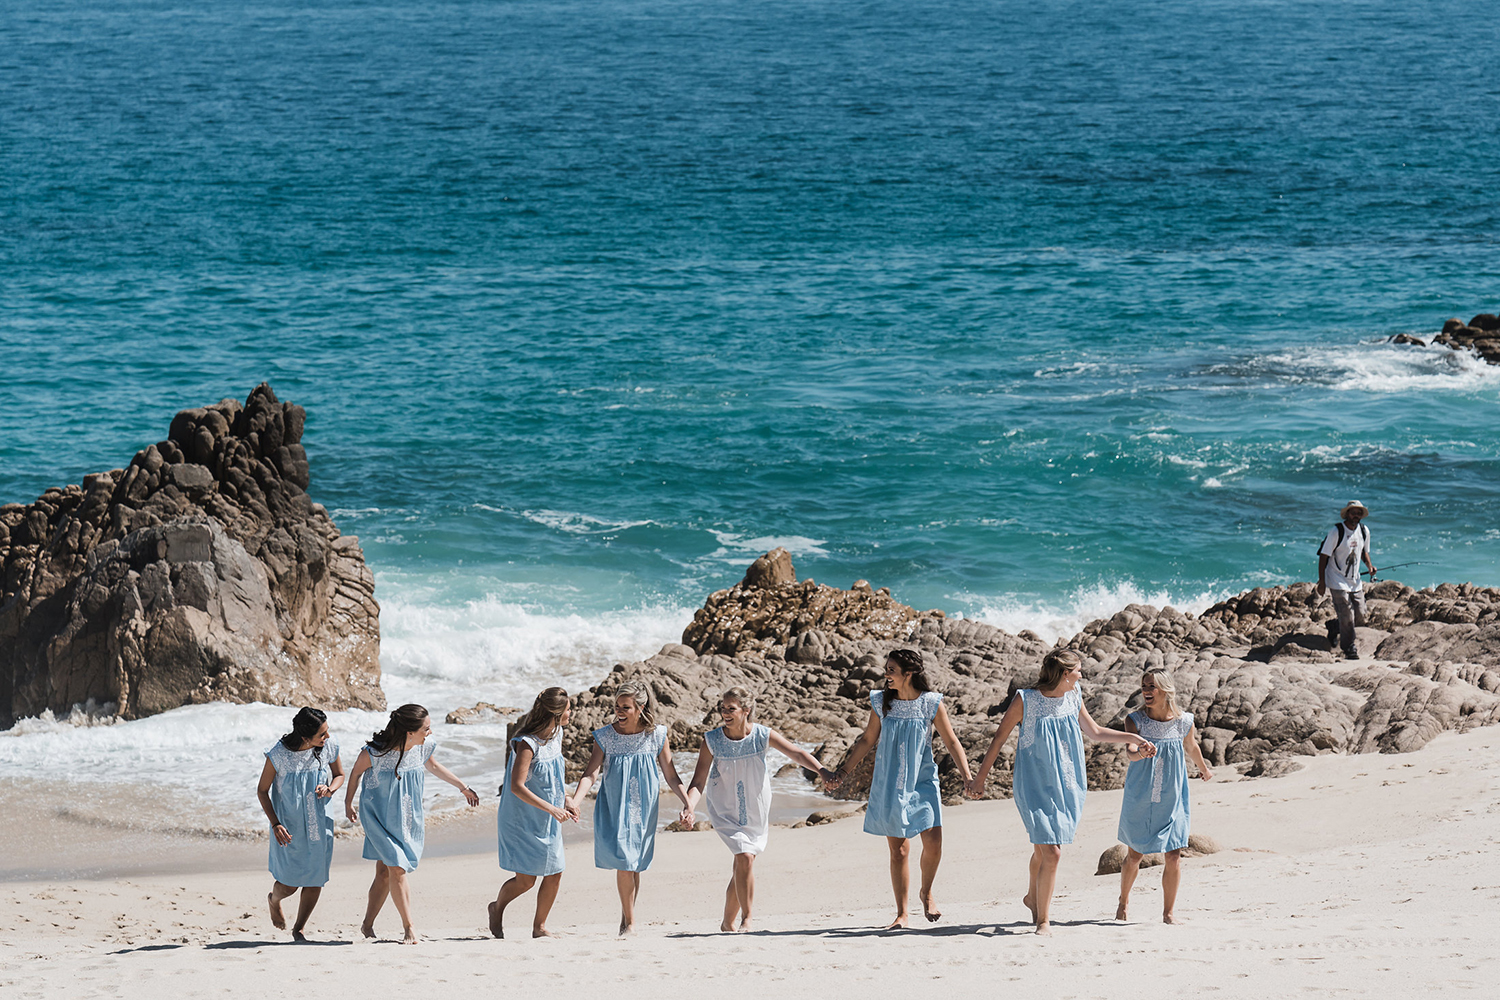 bridesmaids and bride before the wedding ceremony - beach photography